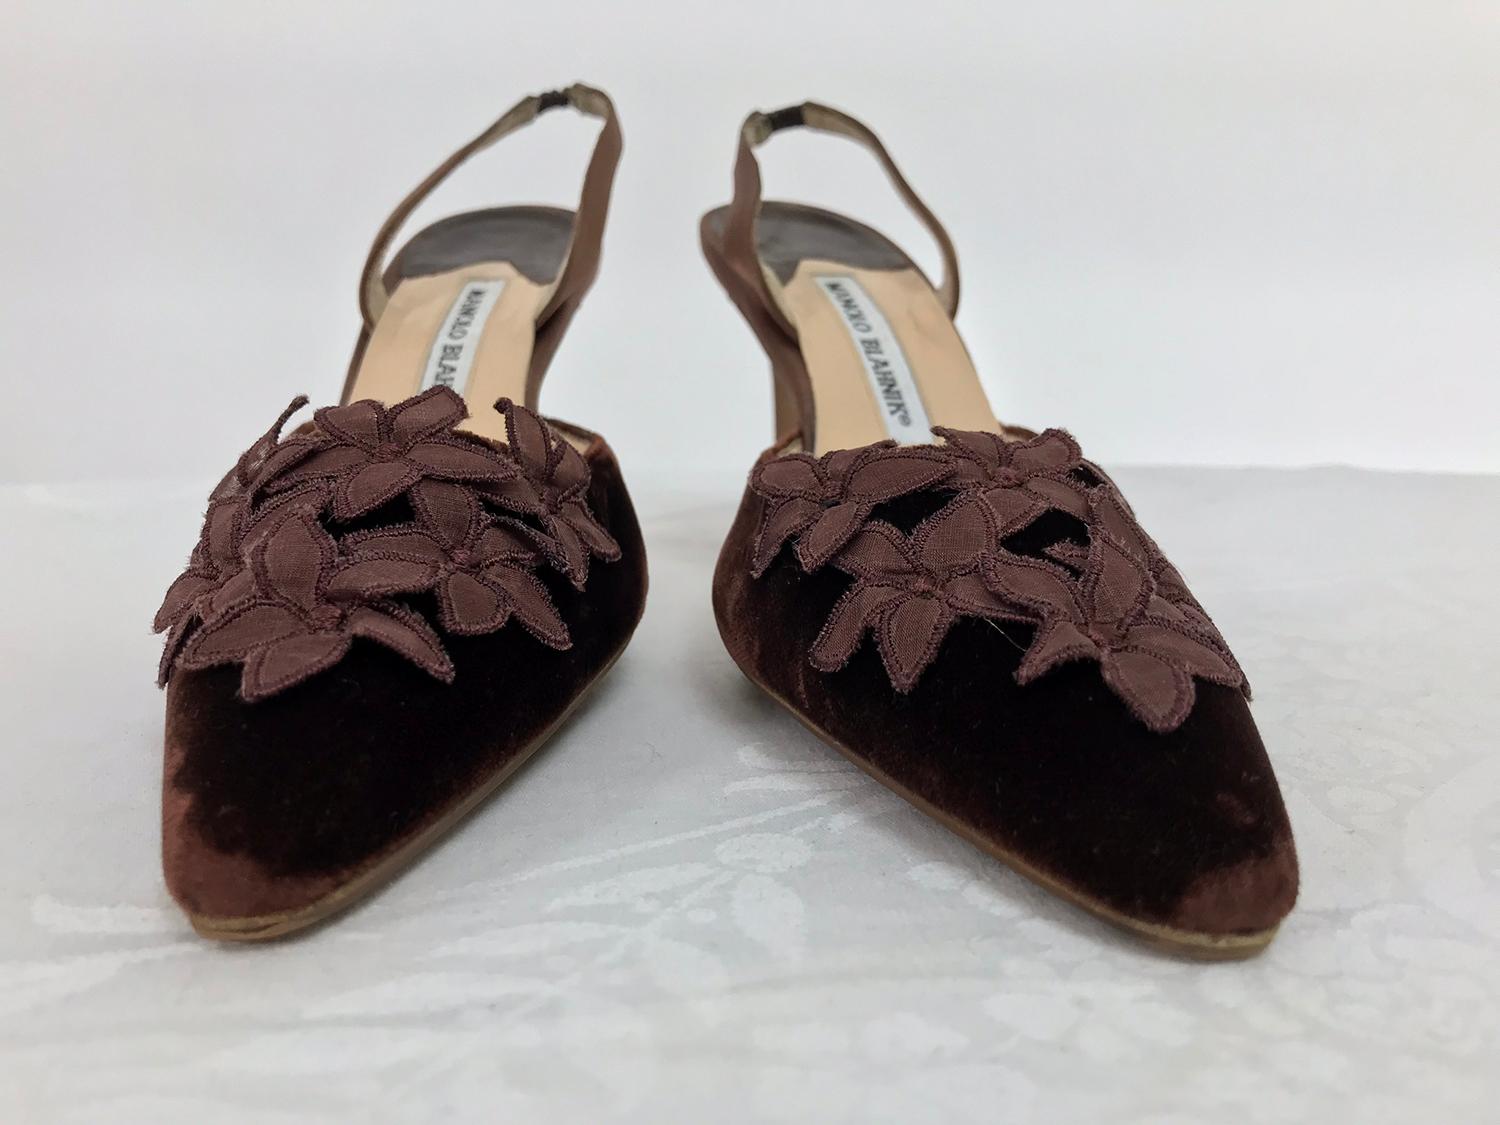 Manolo Blahnik dark chocolate brown velvet, satin and organza floral sling back pumps size 37. In excellent condition, however, these shoes have had non slip soles added to the front of the sole. Heel measured from bottom to inside heel back 3 1/2